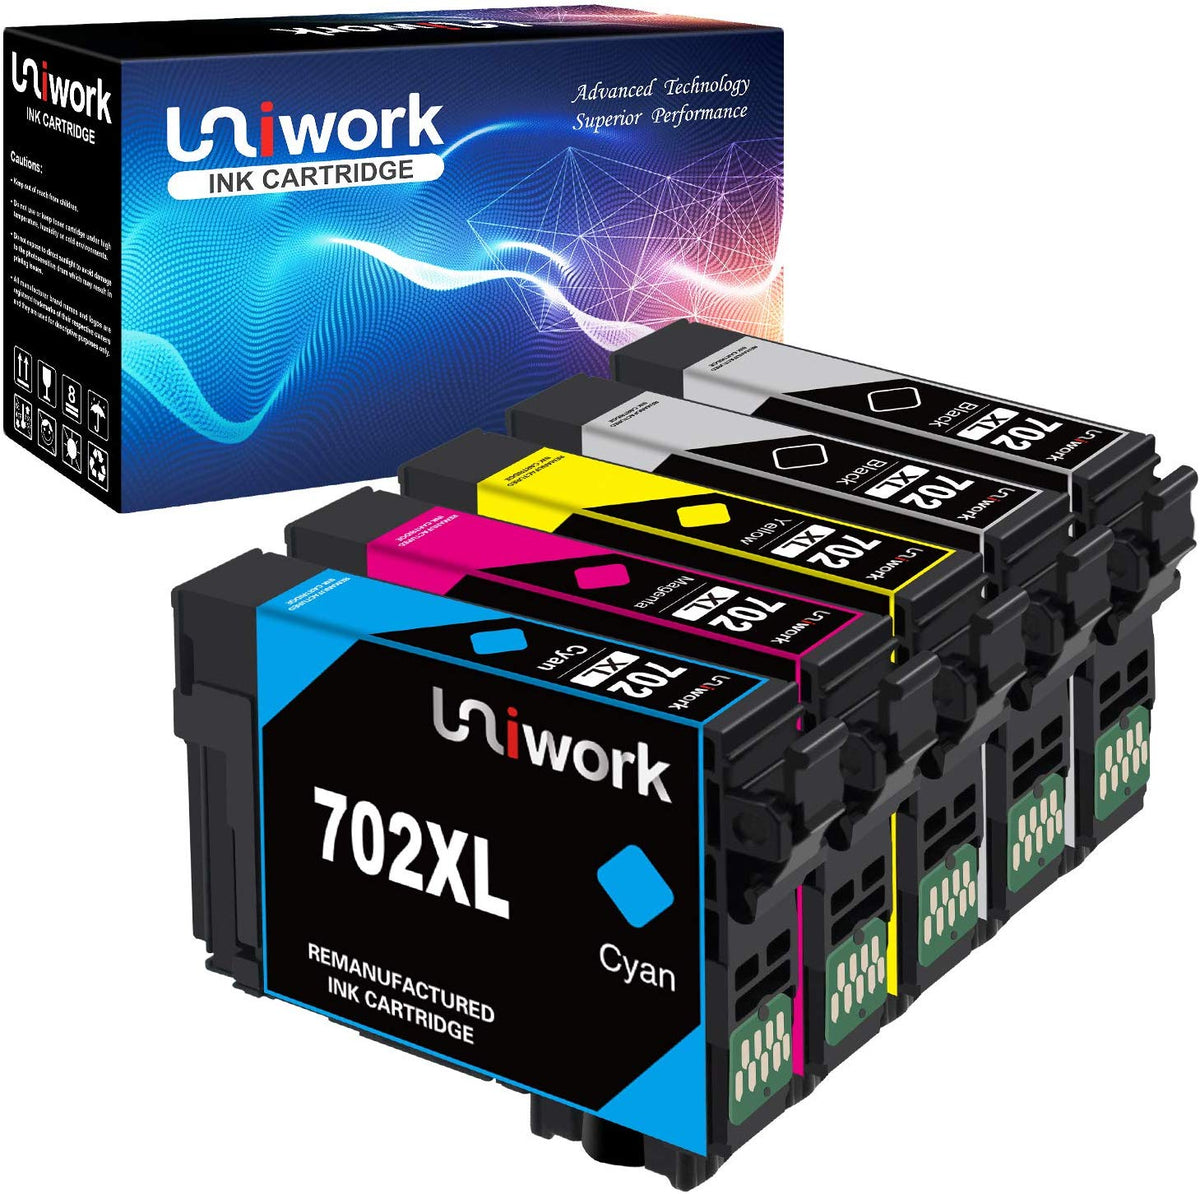 Uniwork Remanufactured Ink Cartridges Replacement For Epson 702 702xl 9662